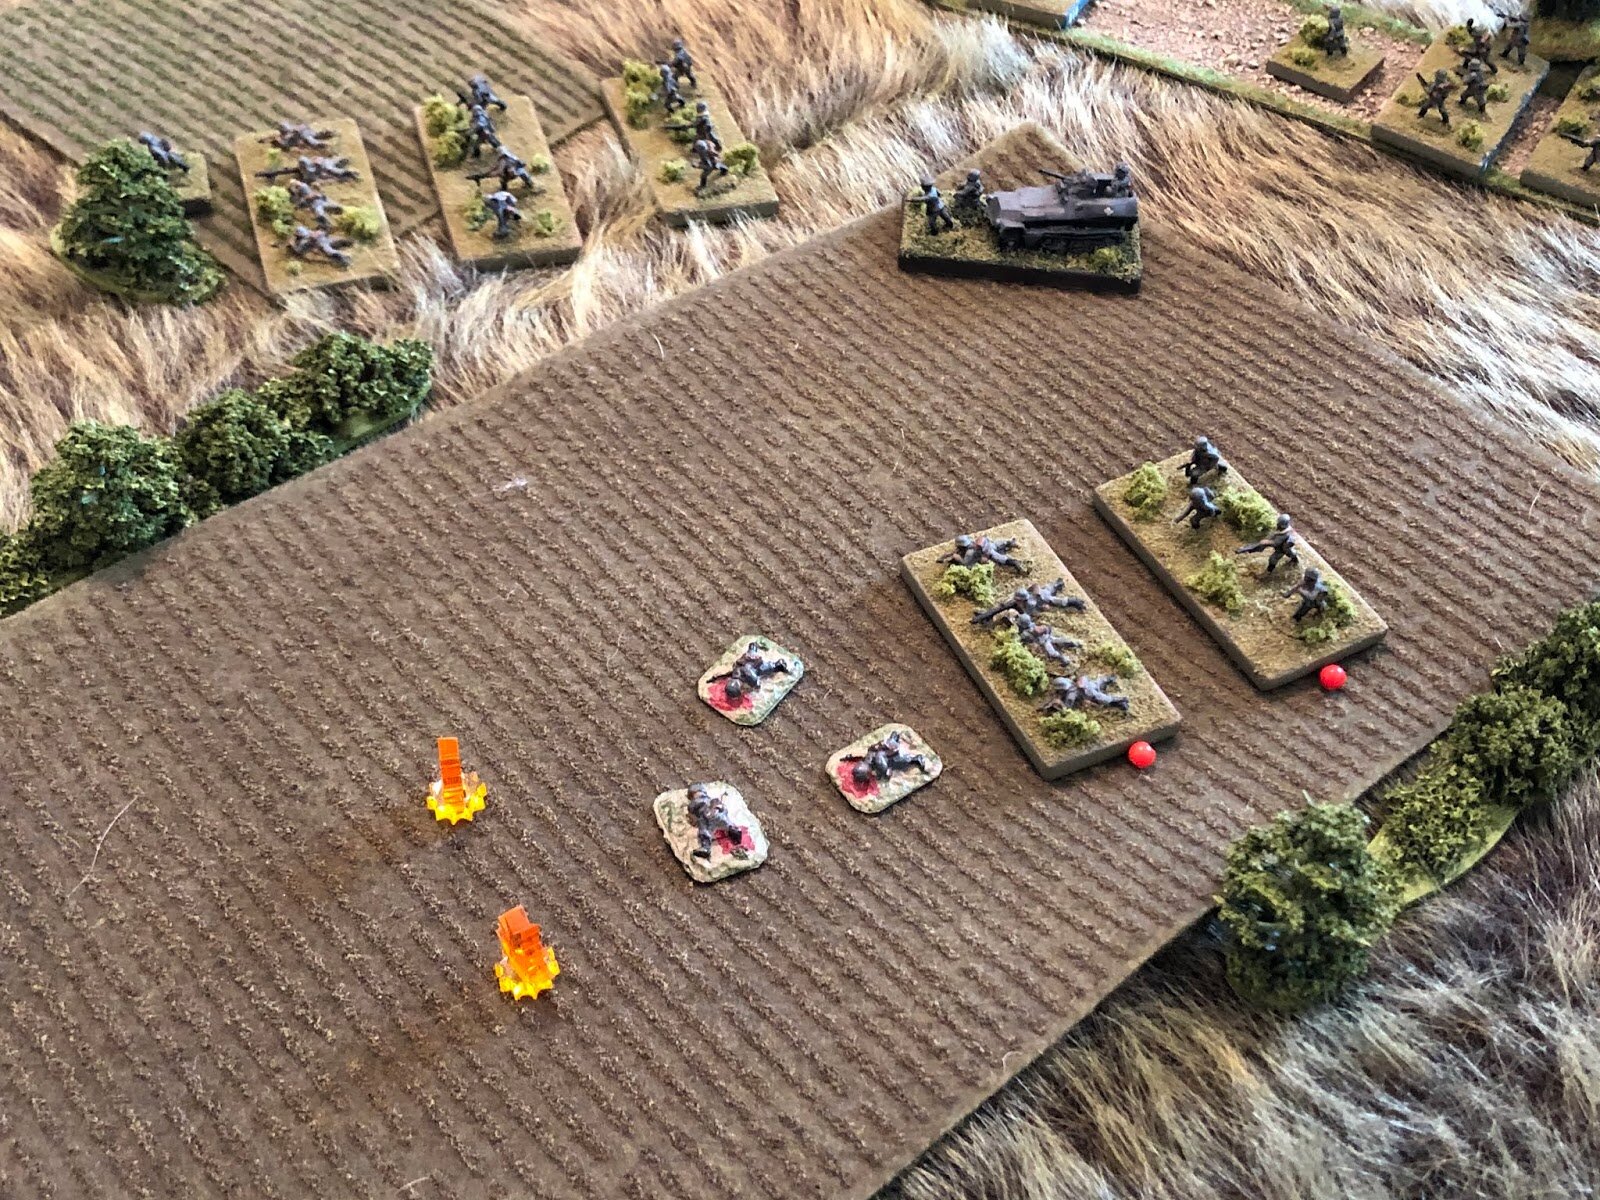 The 76.2mm Field Gun, the 50mm light mortar, and the Maxim MG pound the German landser mercilessly, killing the platoon commander, knocking out 1st Squad, and suppressing the other two...